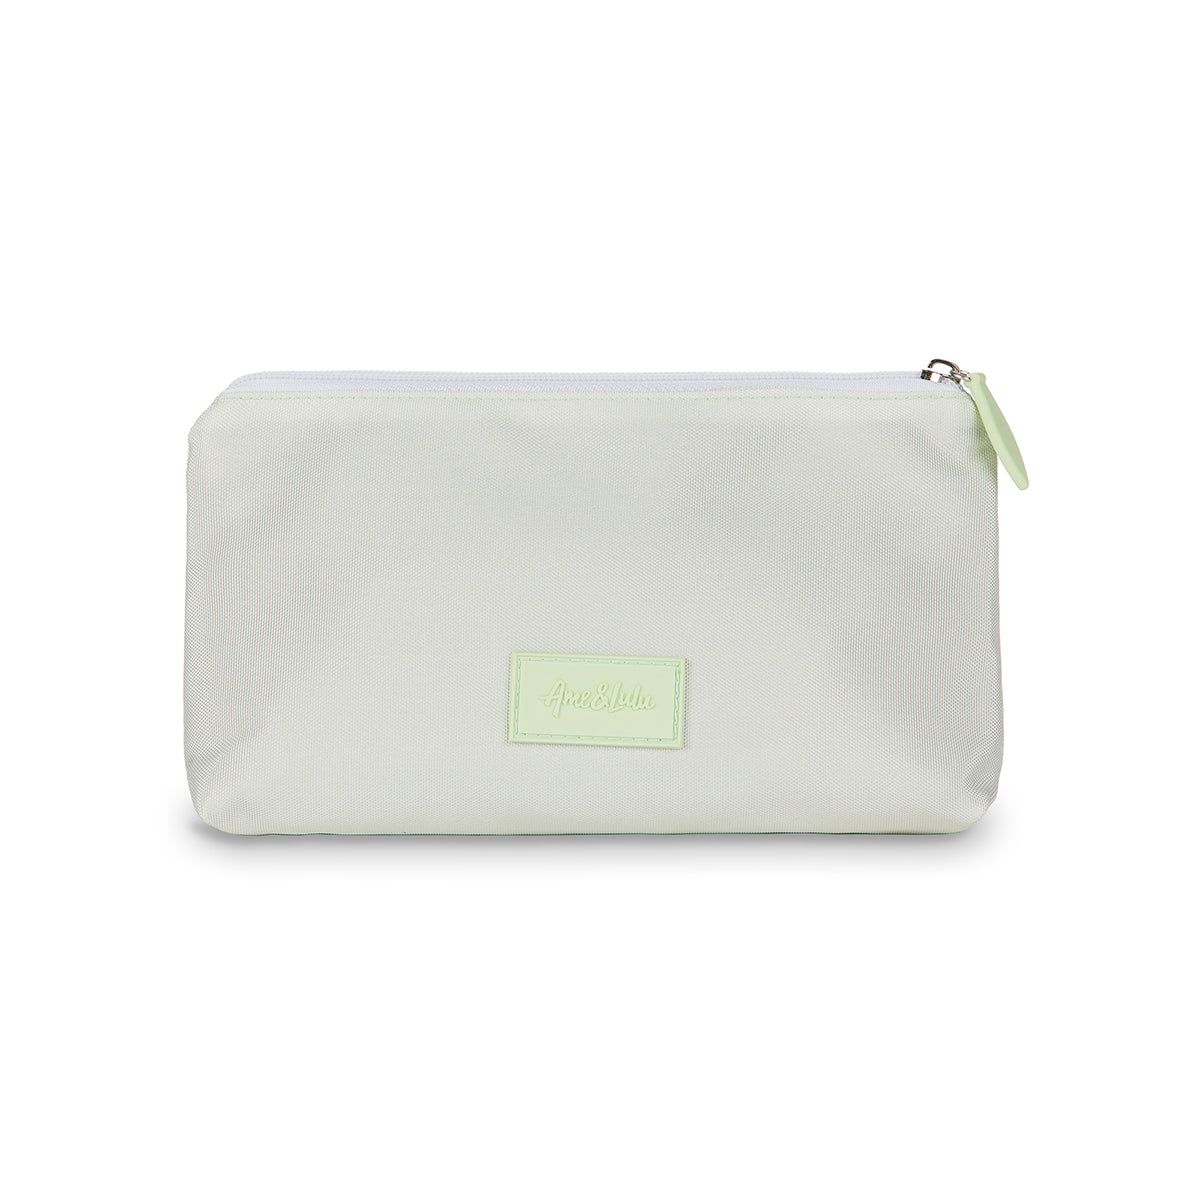 Back view of small everyday pouch with top zipper. Pouch is light green